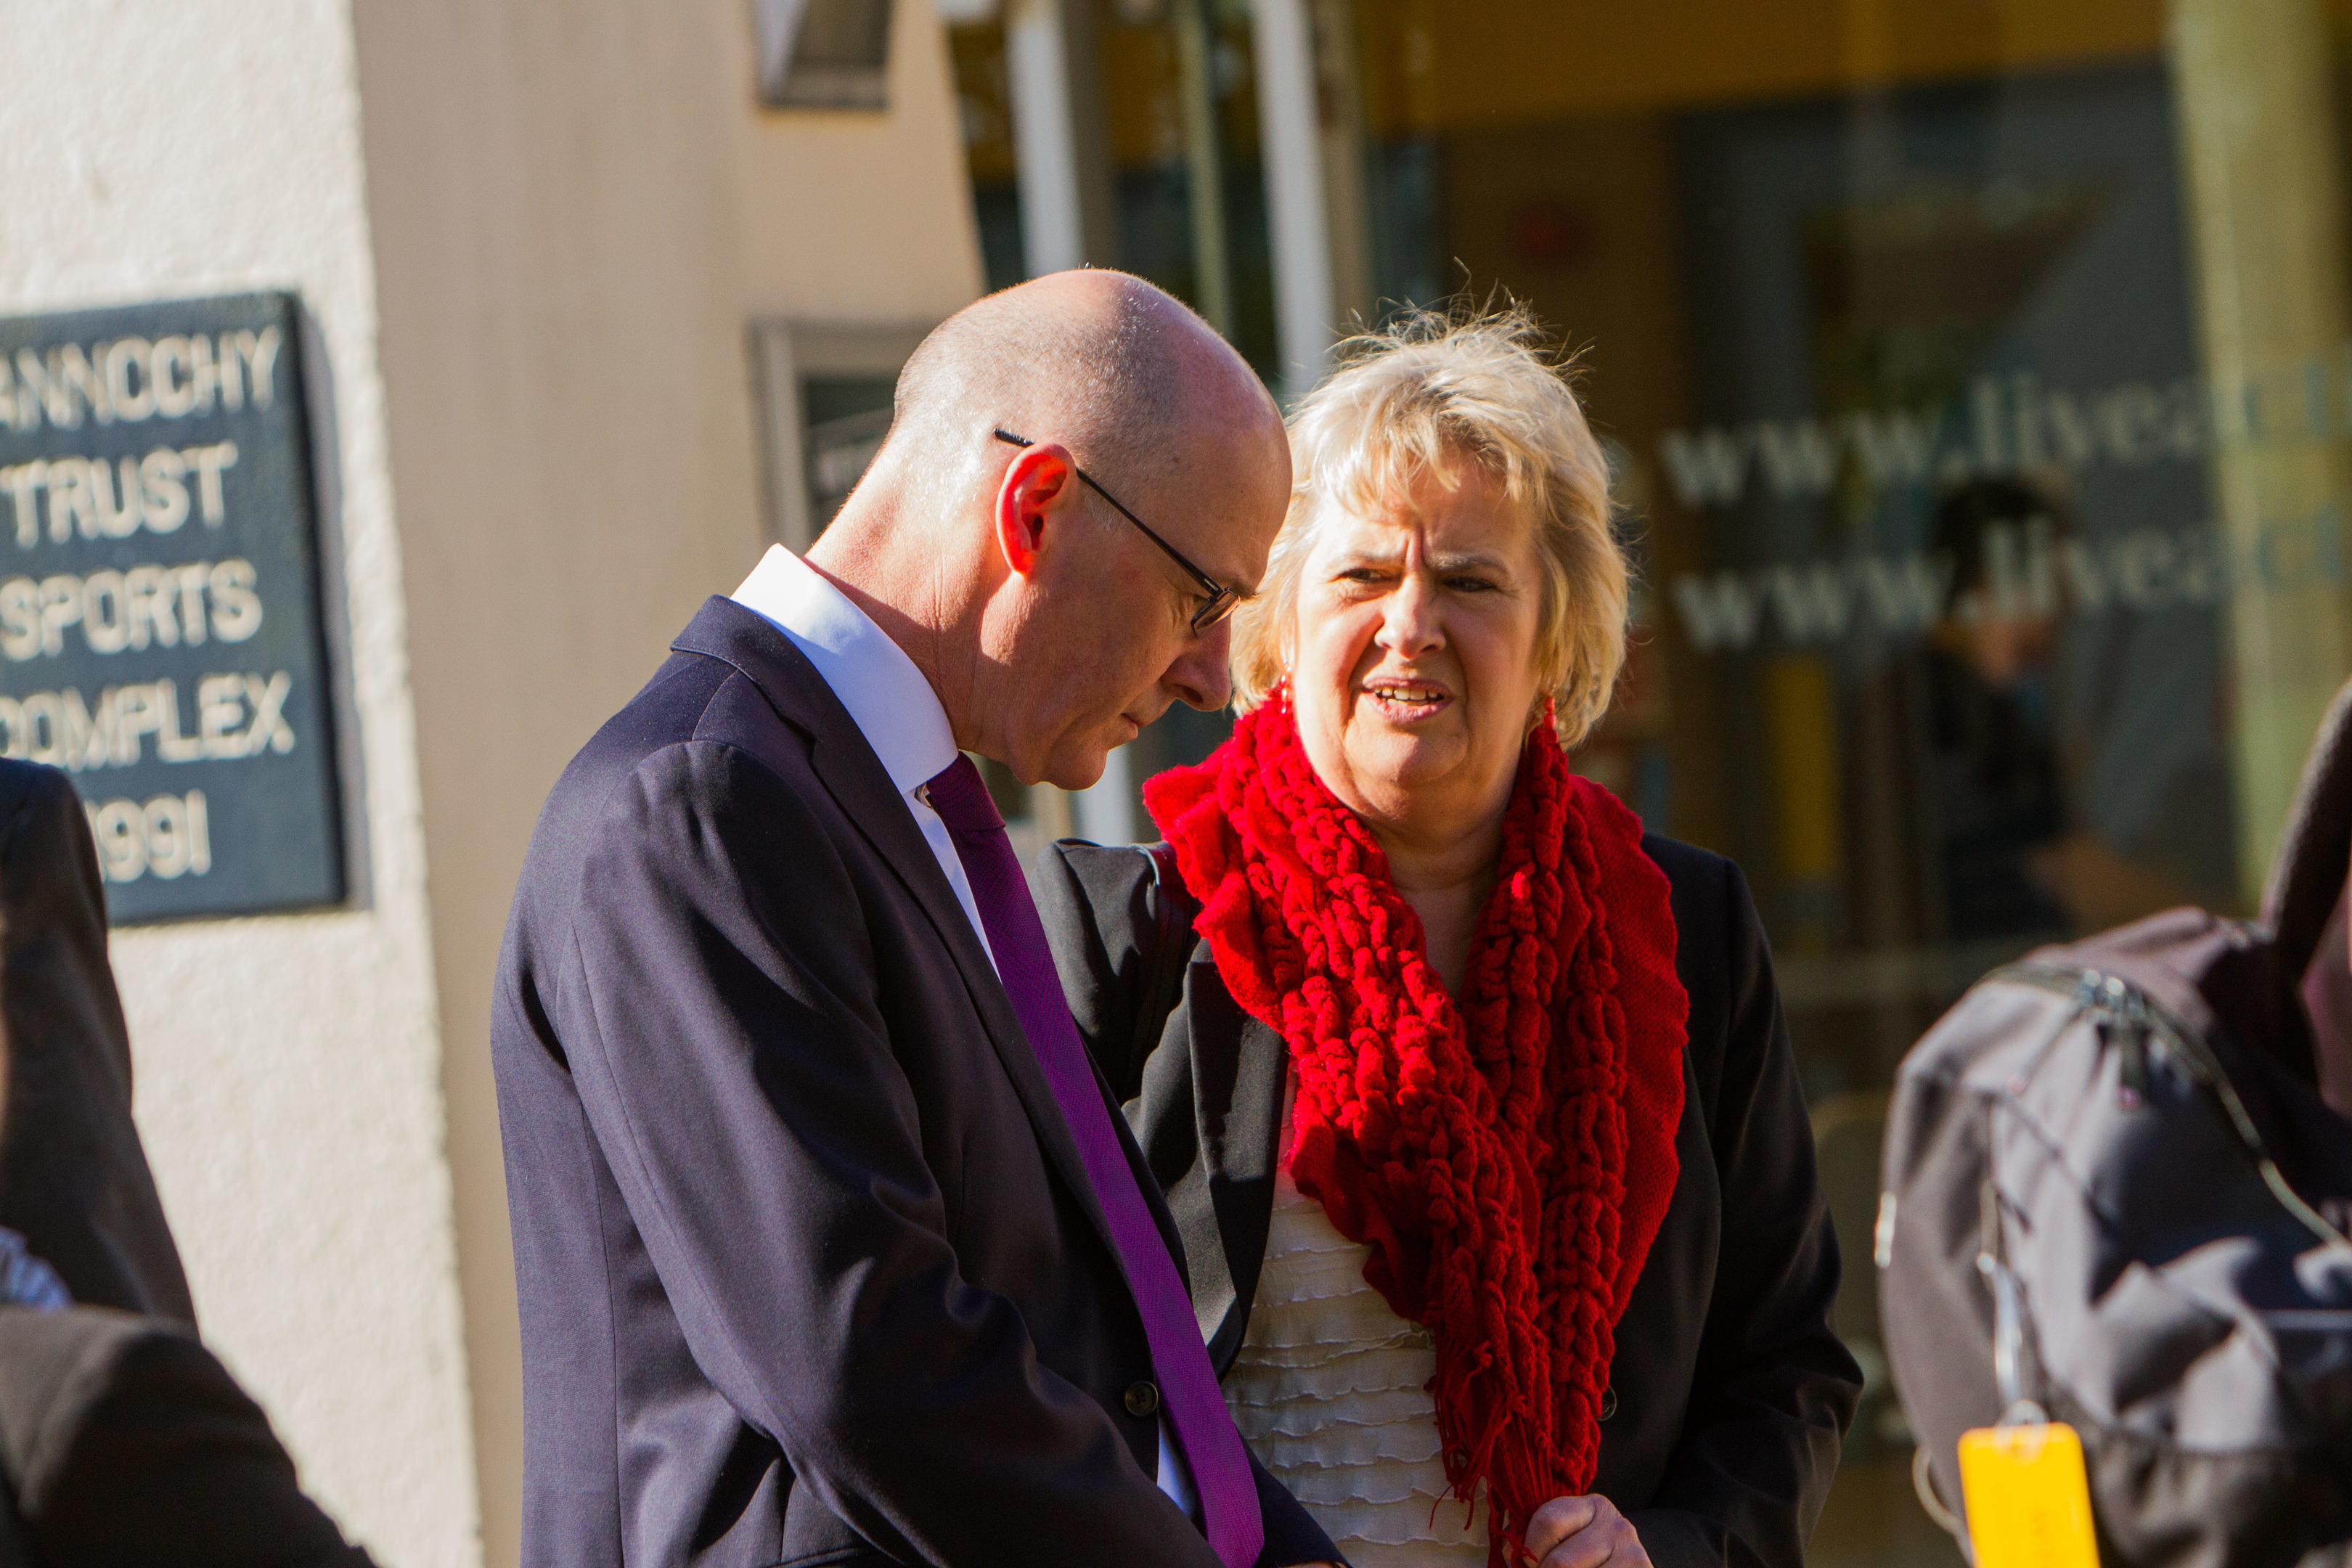 Deputy First Minister John Swinney and Environment Secretary Roseanna Cunningham at Bells Sports Centre, Perth, where the SNP lost control of Perth and Kinross Council to the Conservatives.